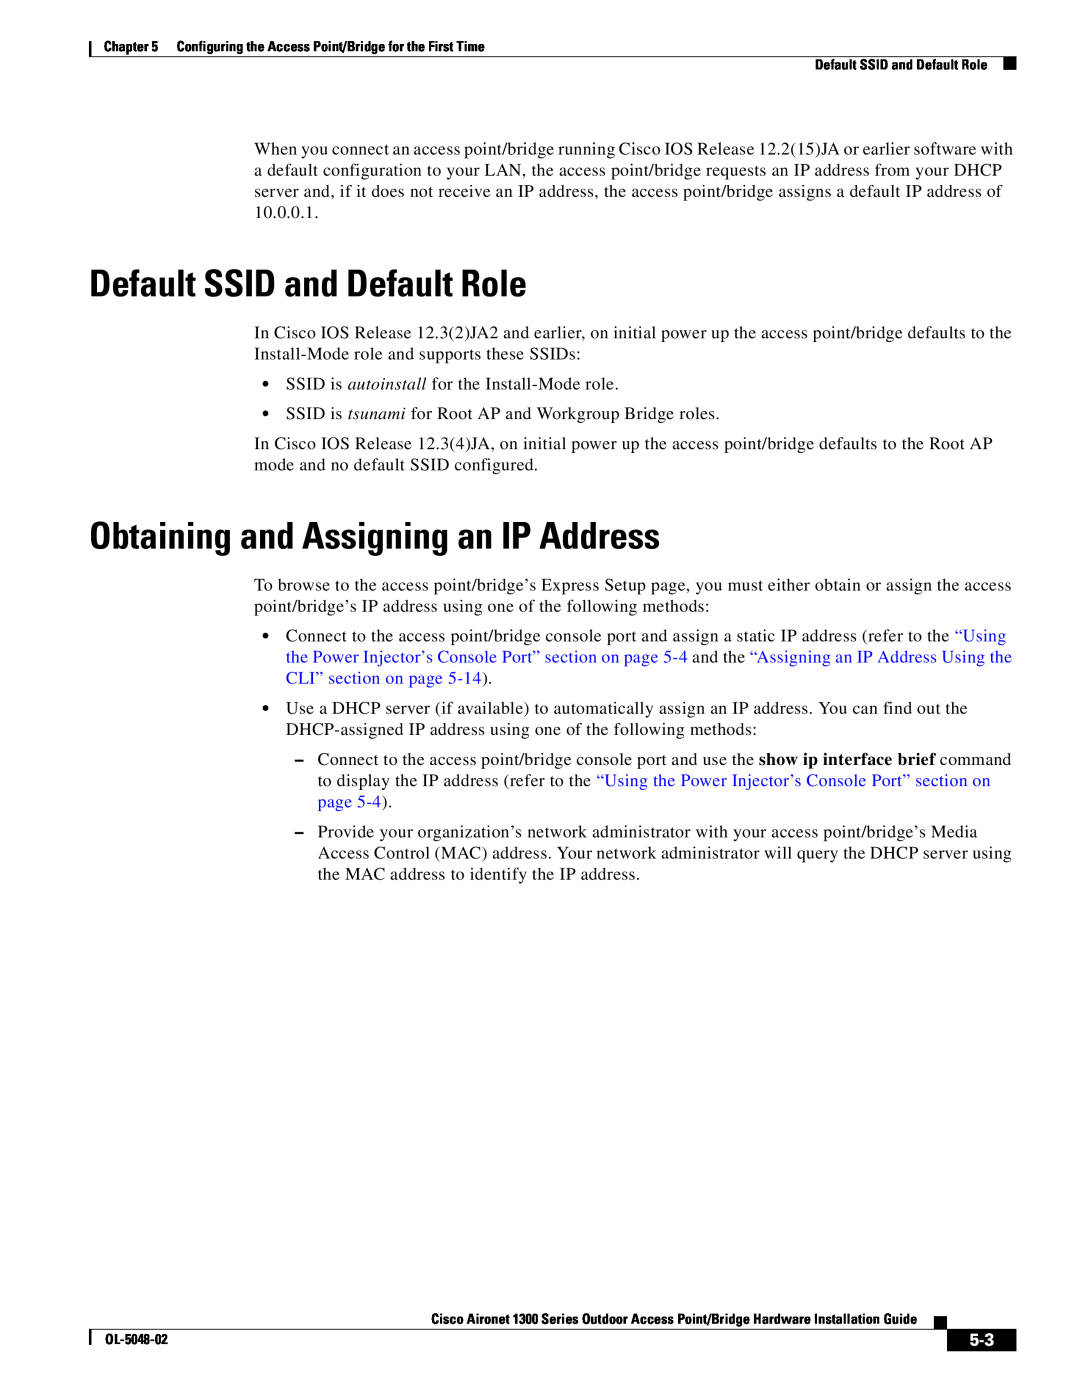 Cisco Systems 1300 Series manual Default SSID and Default Role, Obtaining and Assigning an IP Address 